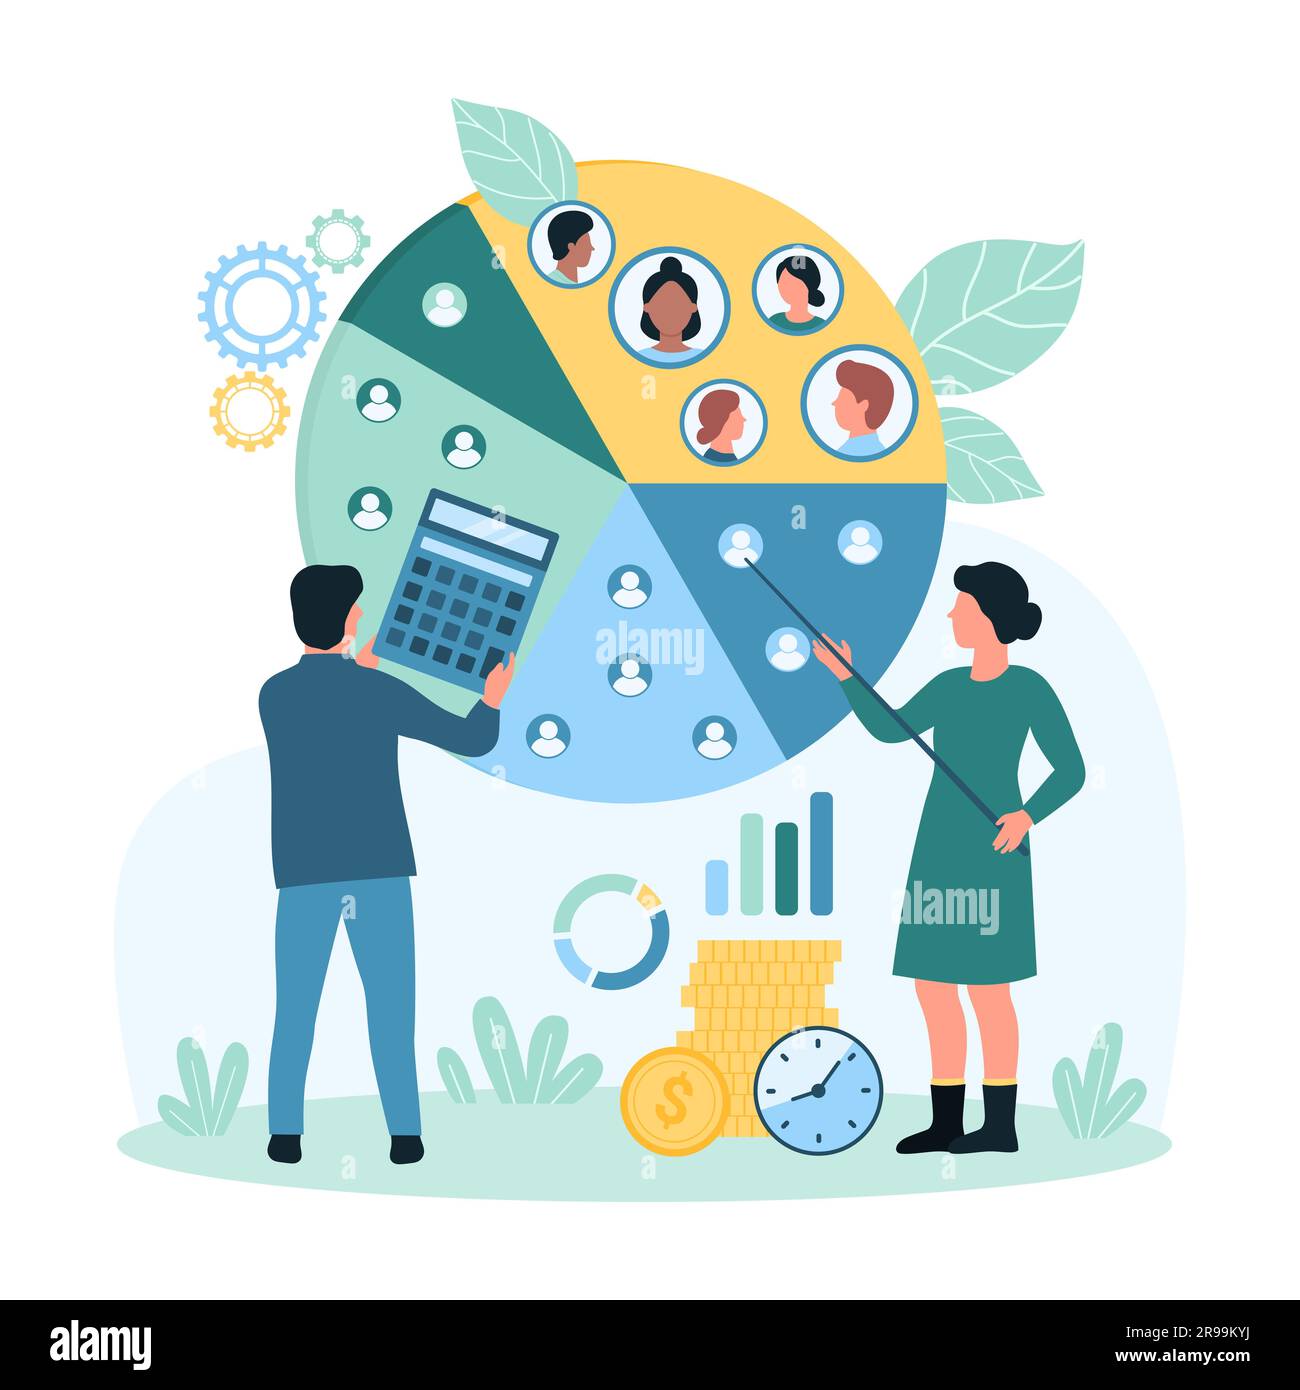 Audience segmentation, marketing research vector illustration. Cartoon tiny people with calculator and pointer divide potential customers focus group into pie chart segments, demographic data analysis Stock Vector